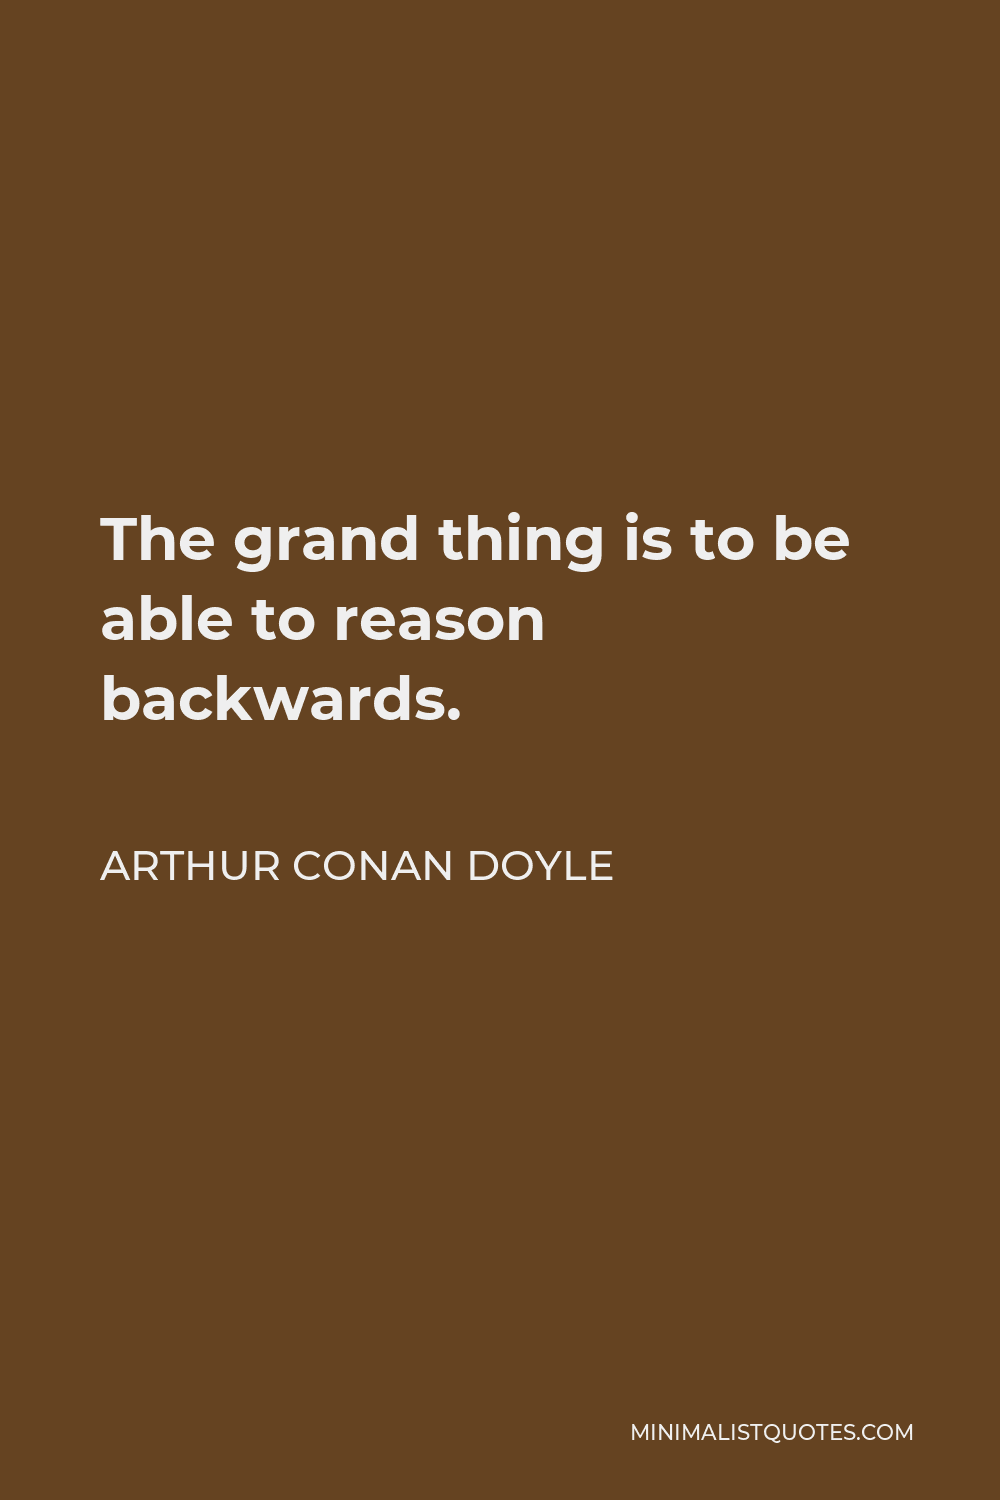 Arthur Conan Doyle Quote - The grand thing is to be able to reason backwards.